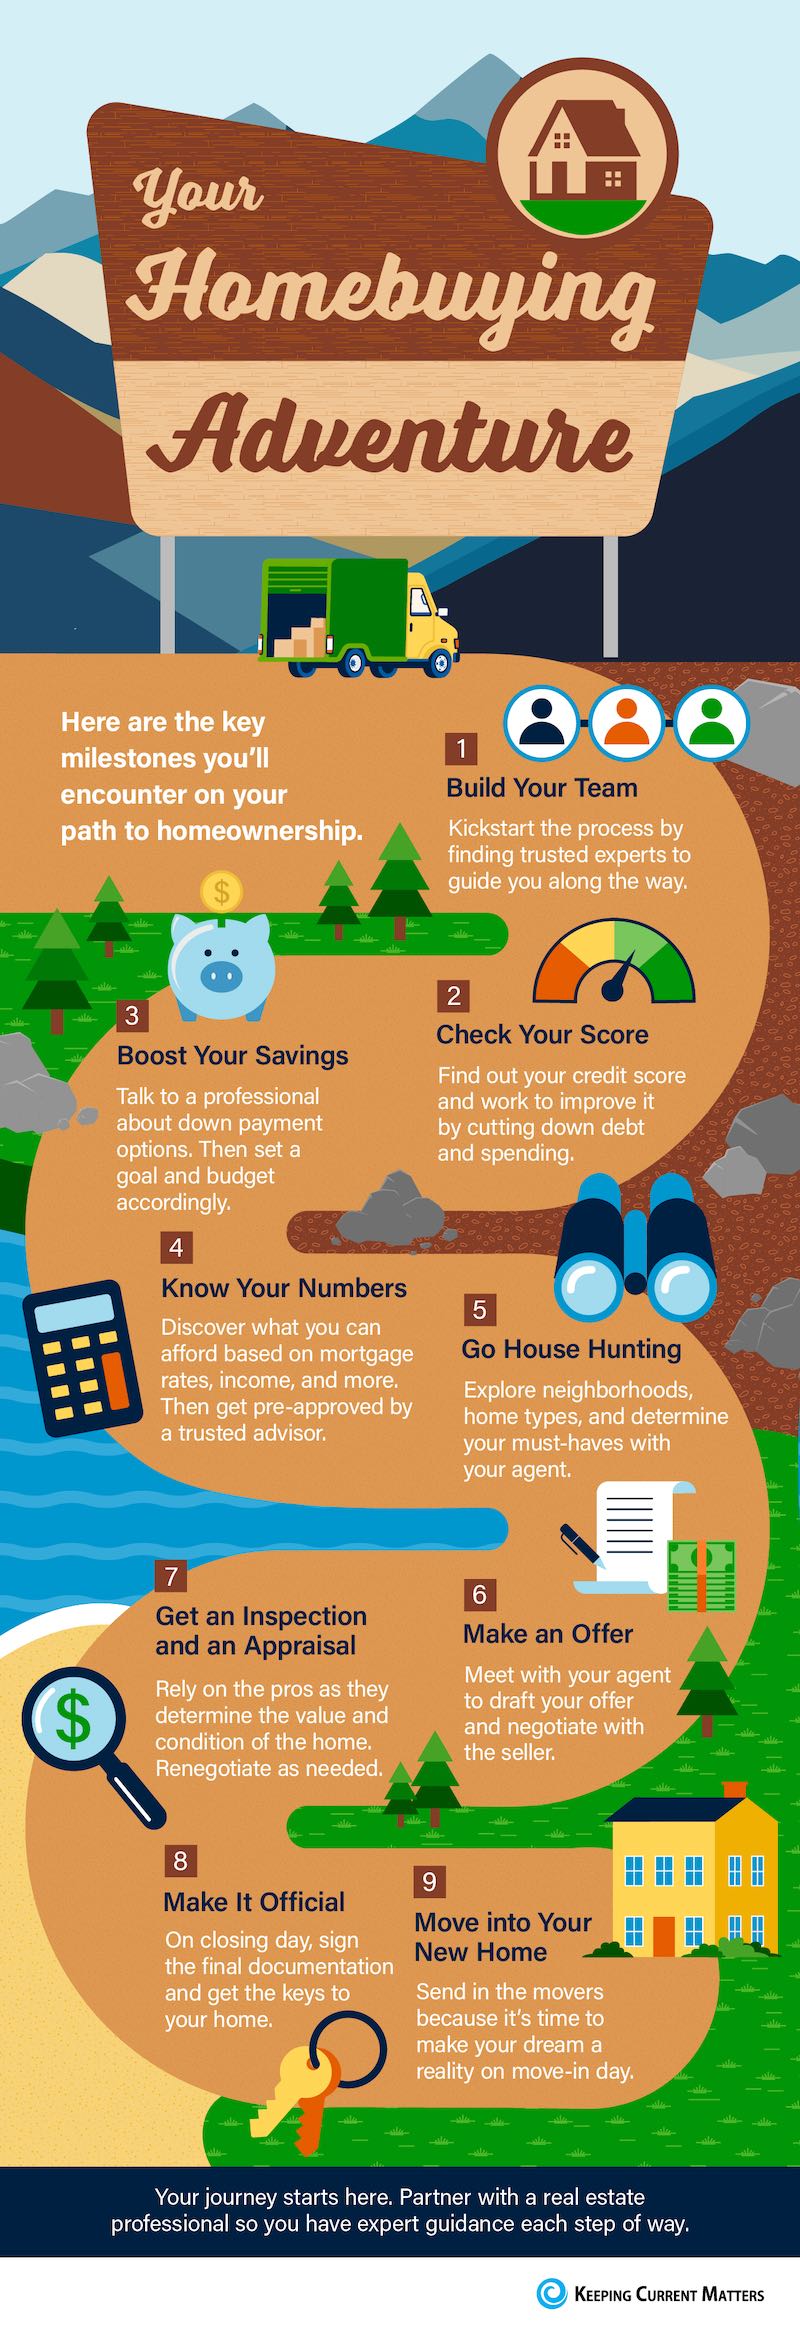 Infographic: 8 Things to Not Overlook When Viewing a New Home